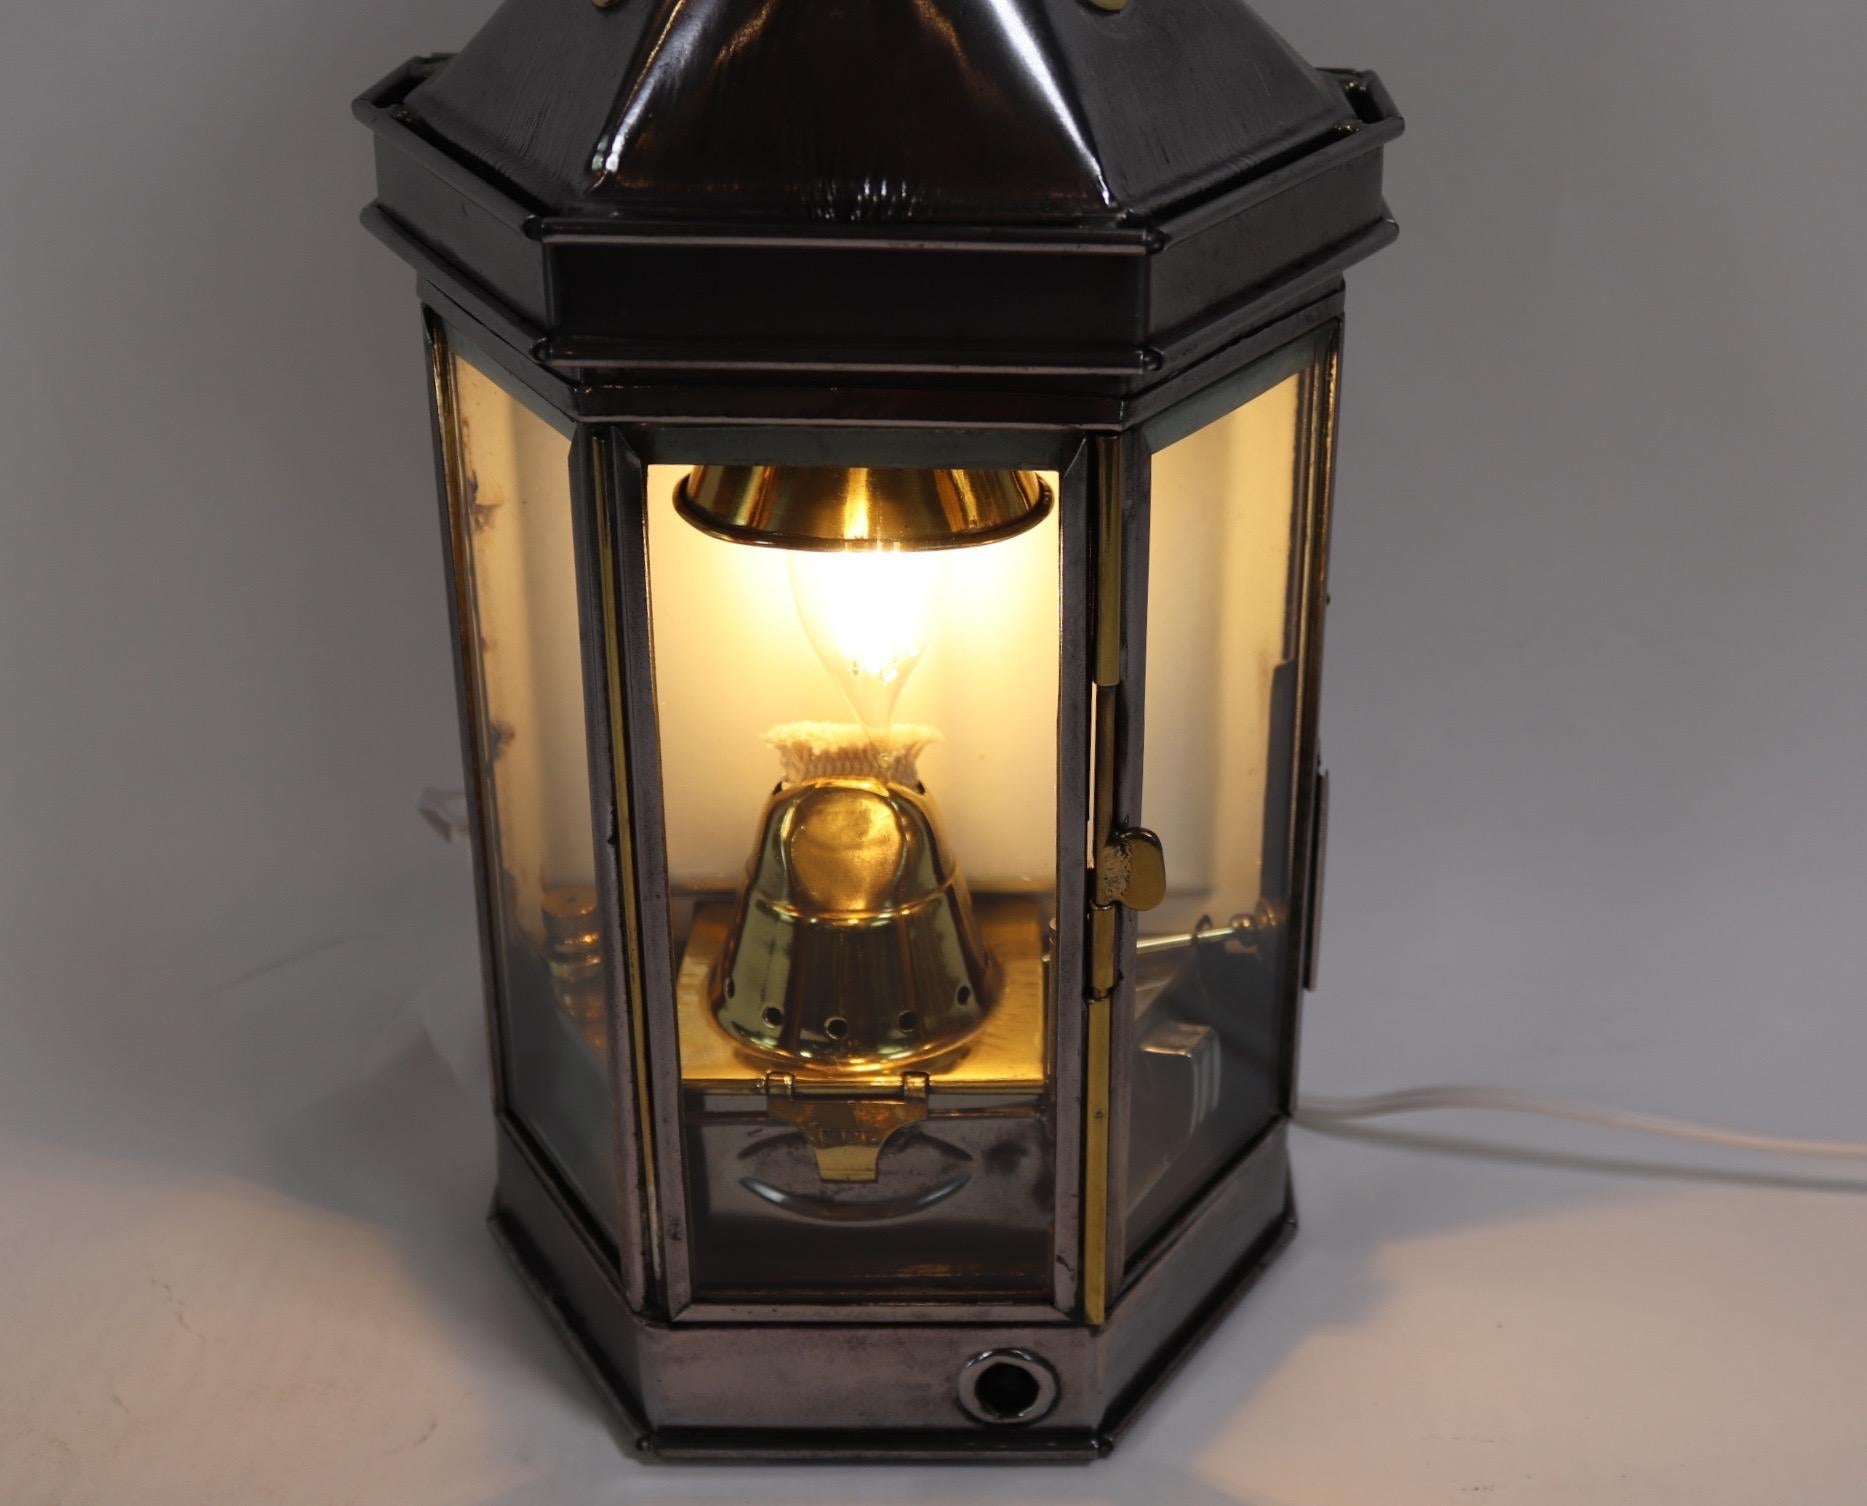 Polished steel cabin lantern from a ship or yacht. Sturdily built with carry handle, three glass panes, and original burner. The lantern has been wired for home display. Weight is 10 pounds.